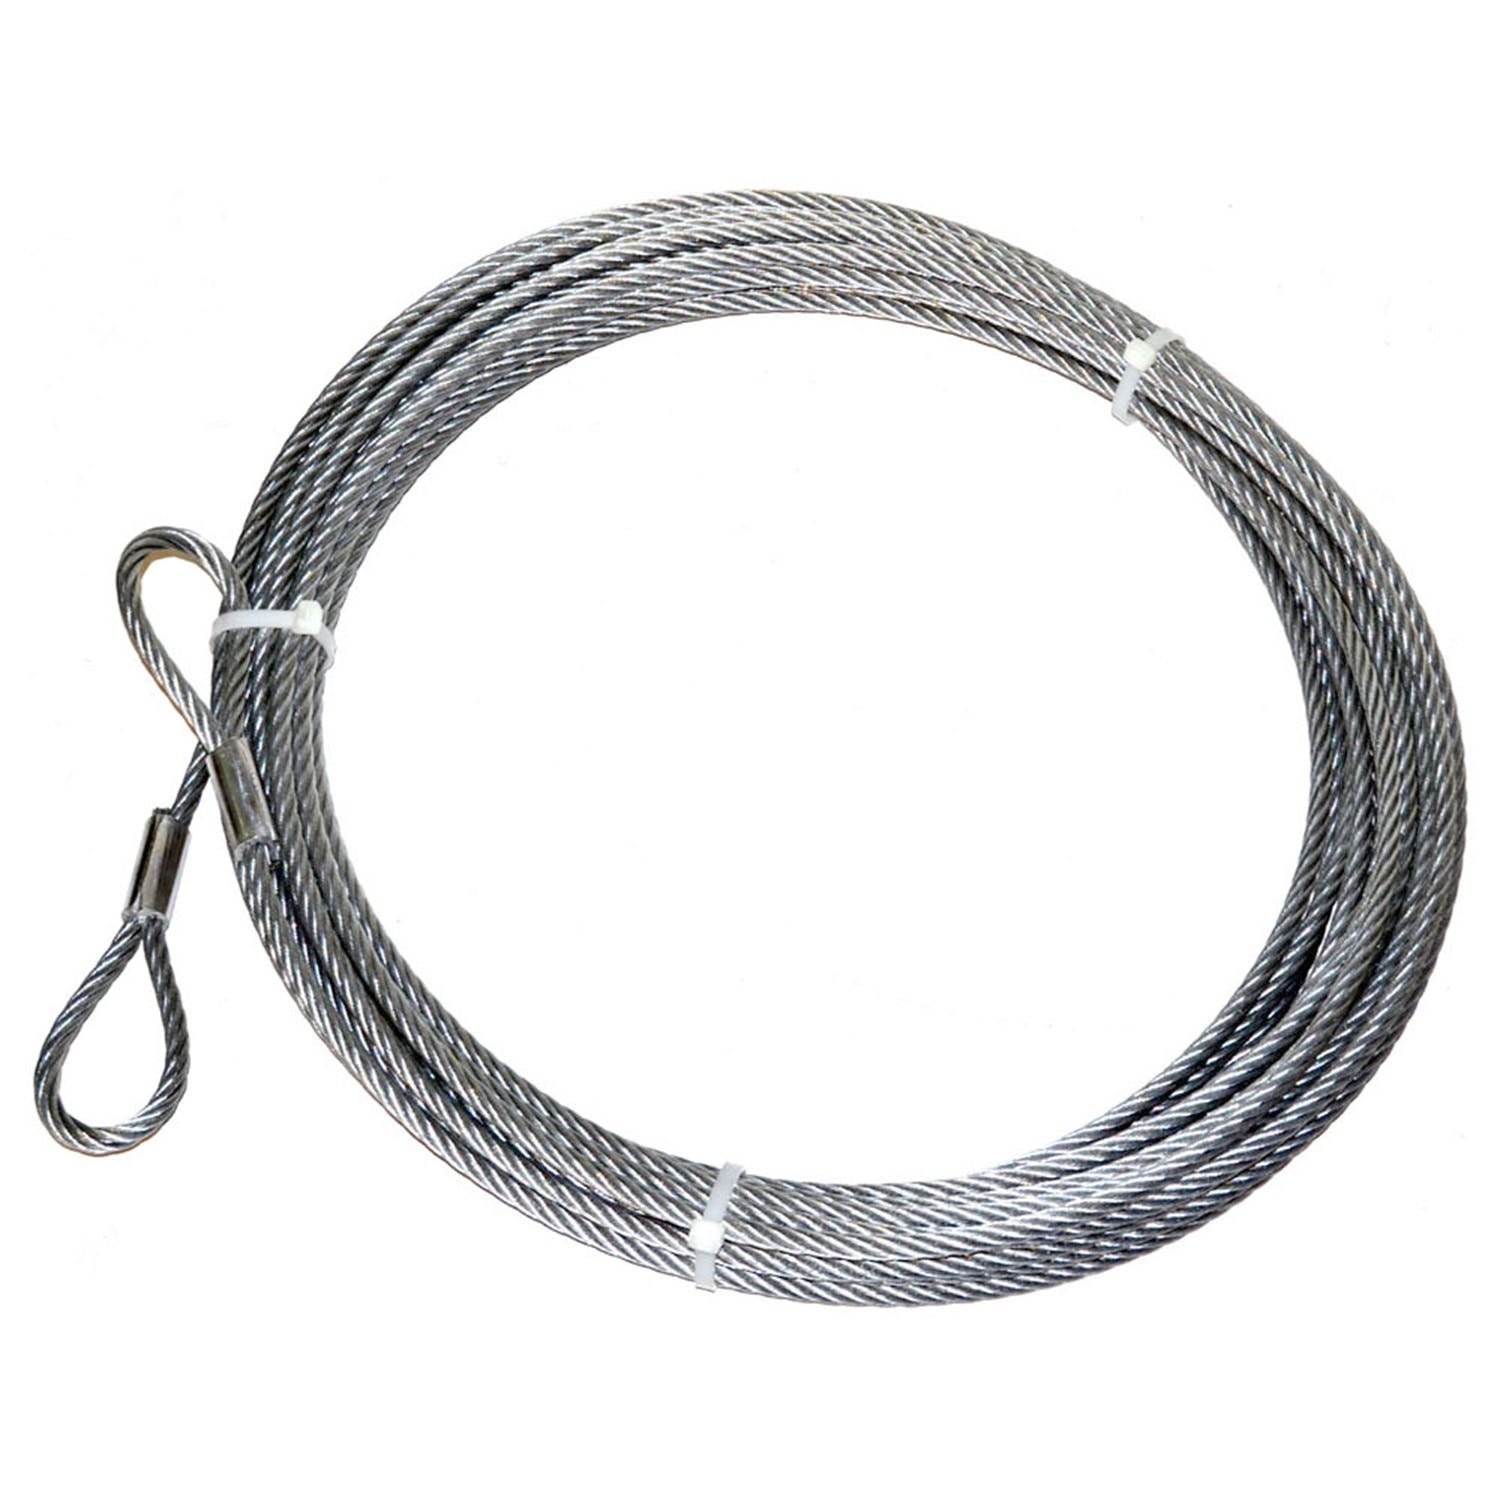 WARN 25431 Wire Rope Extension 3/8 X 75